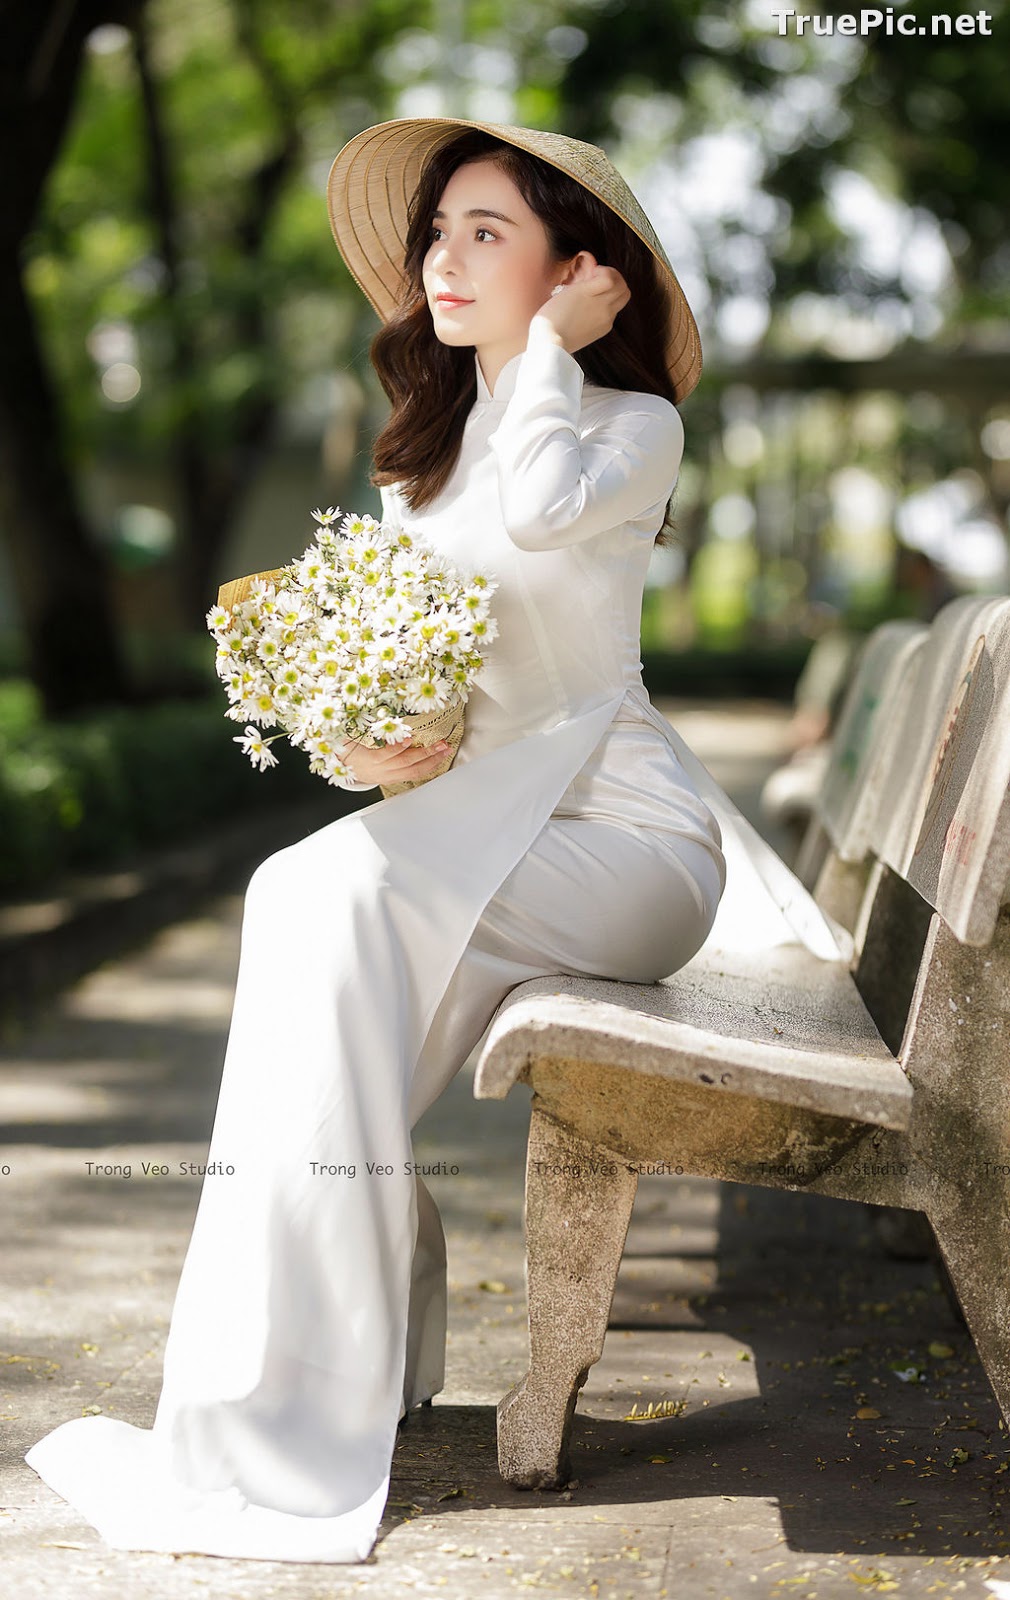 Image The Beauty of Vietnamese Girls with Traditional Dress (Ao Dai) #4 - TruePic.net - Picture-40